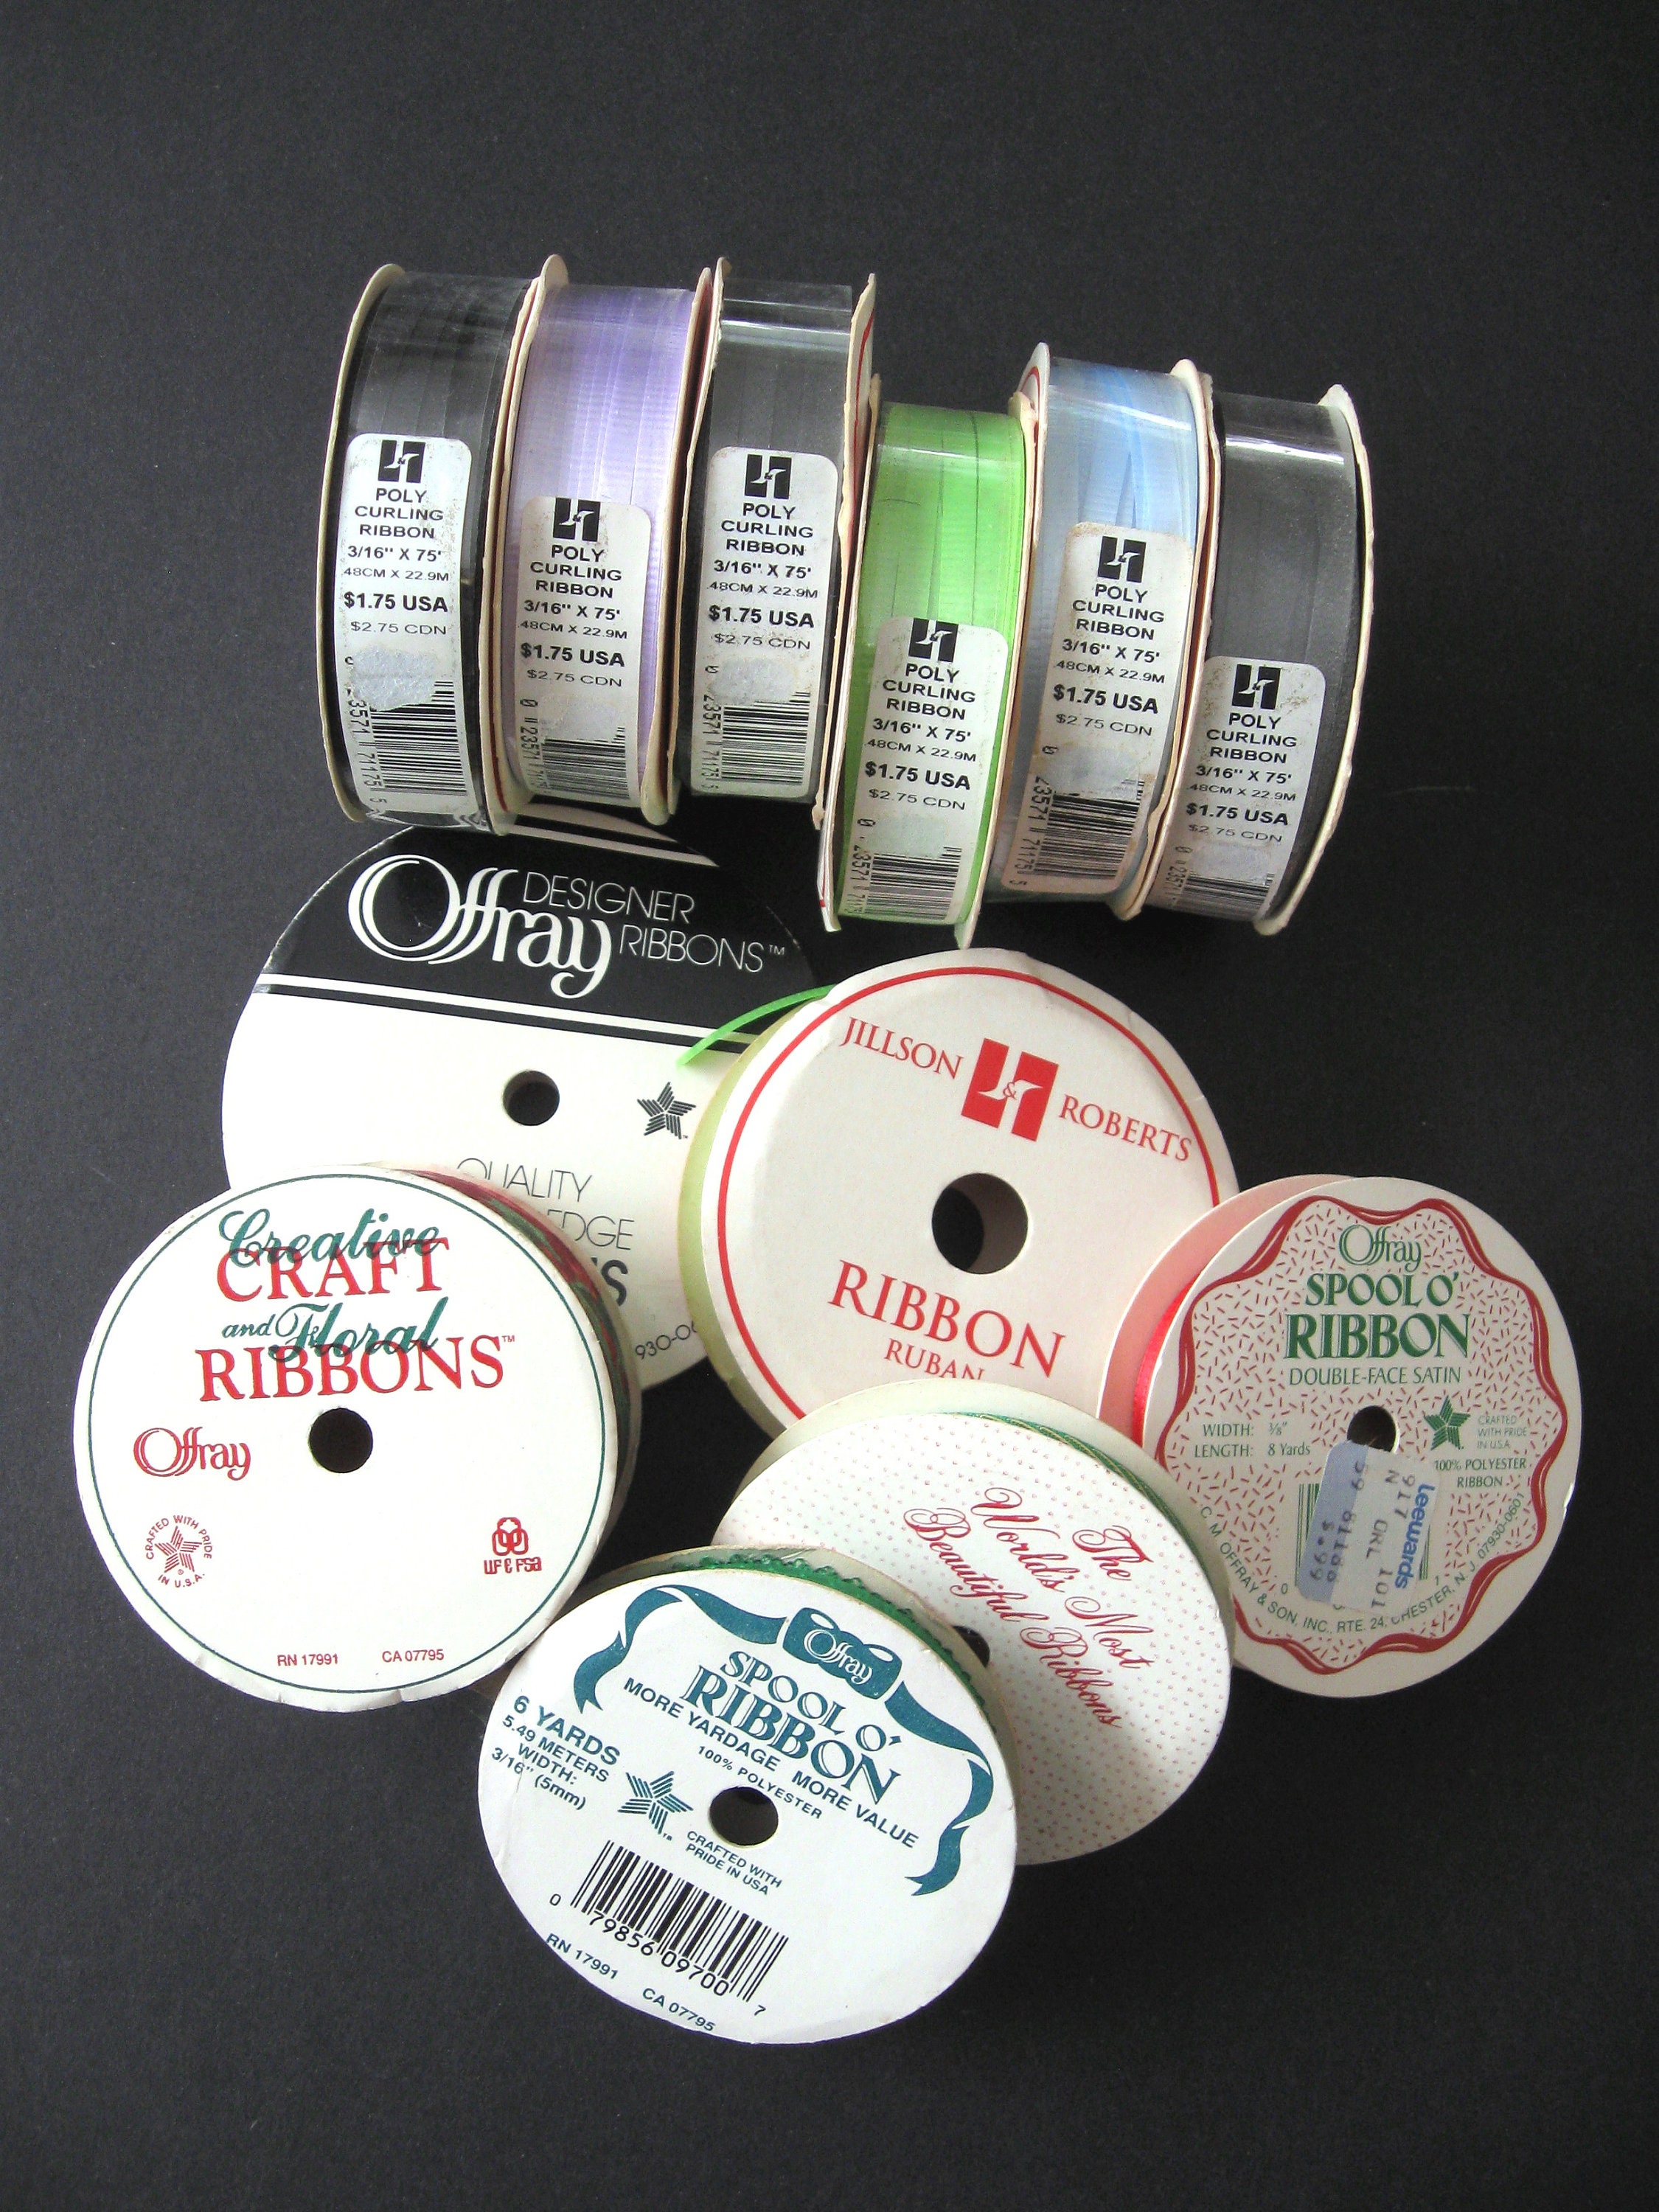 Curling Ribbon Spool Crimped 3/16 500 yards 1500 Feet, Offering 27 colors,  for balloons, favors and gifts